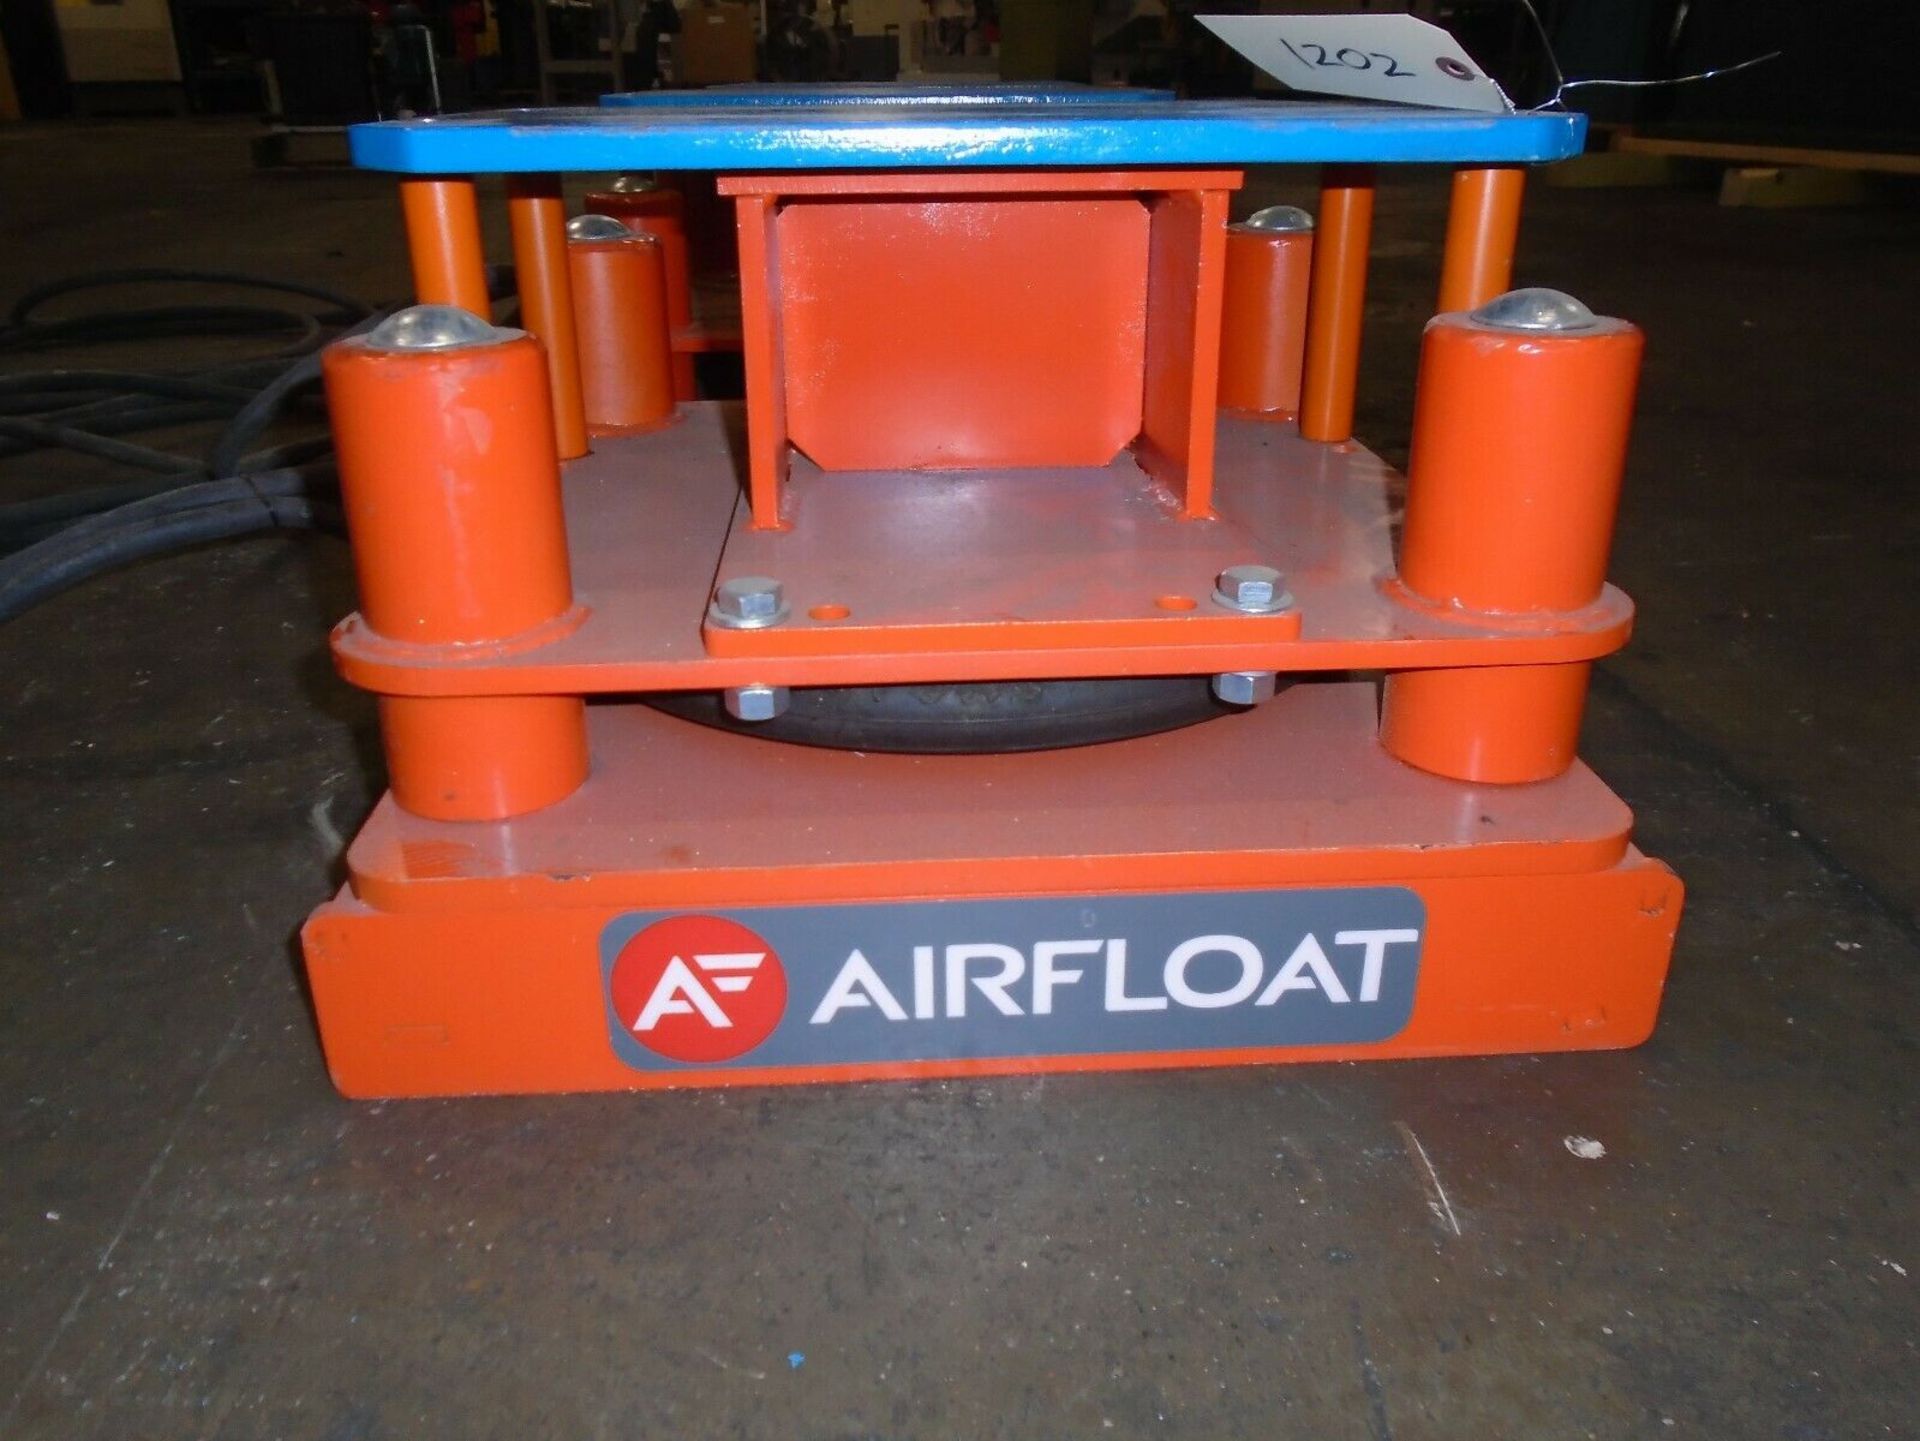 Airfloat AF06017-3 Lift Guide Air Skid - Image 8 of 11